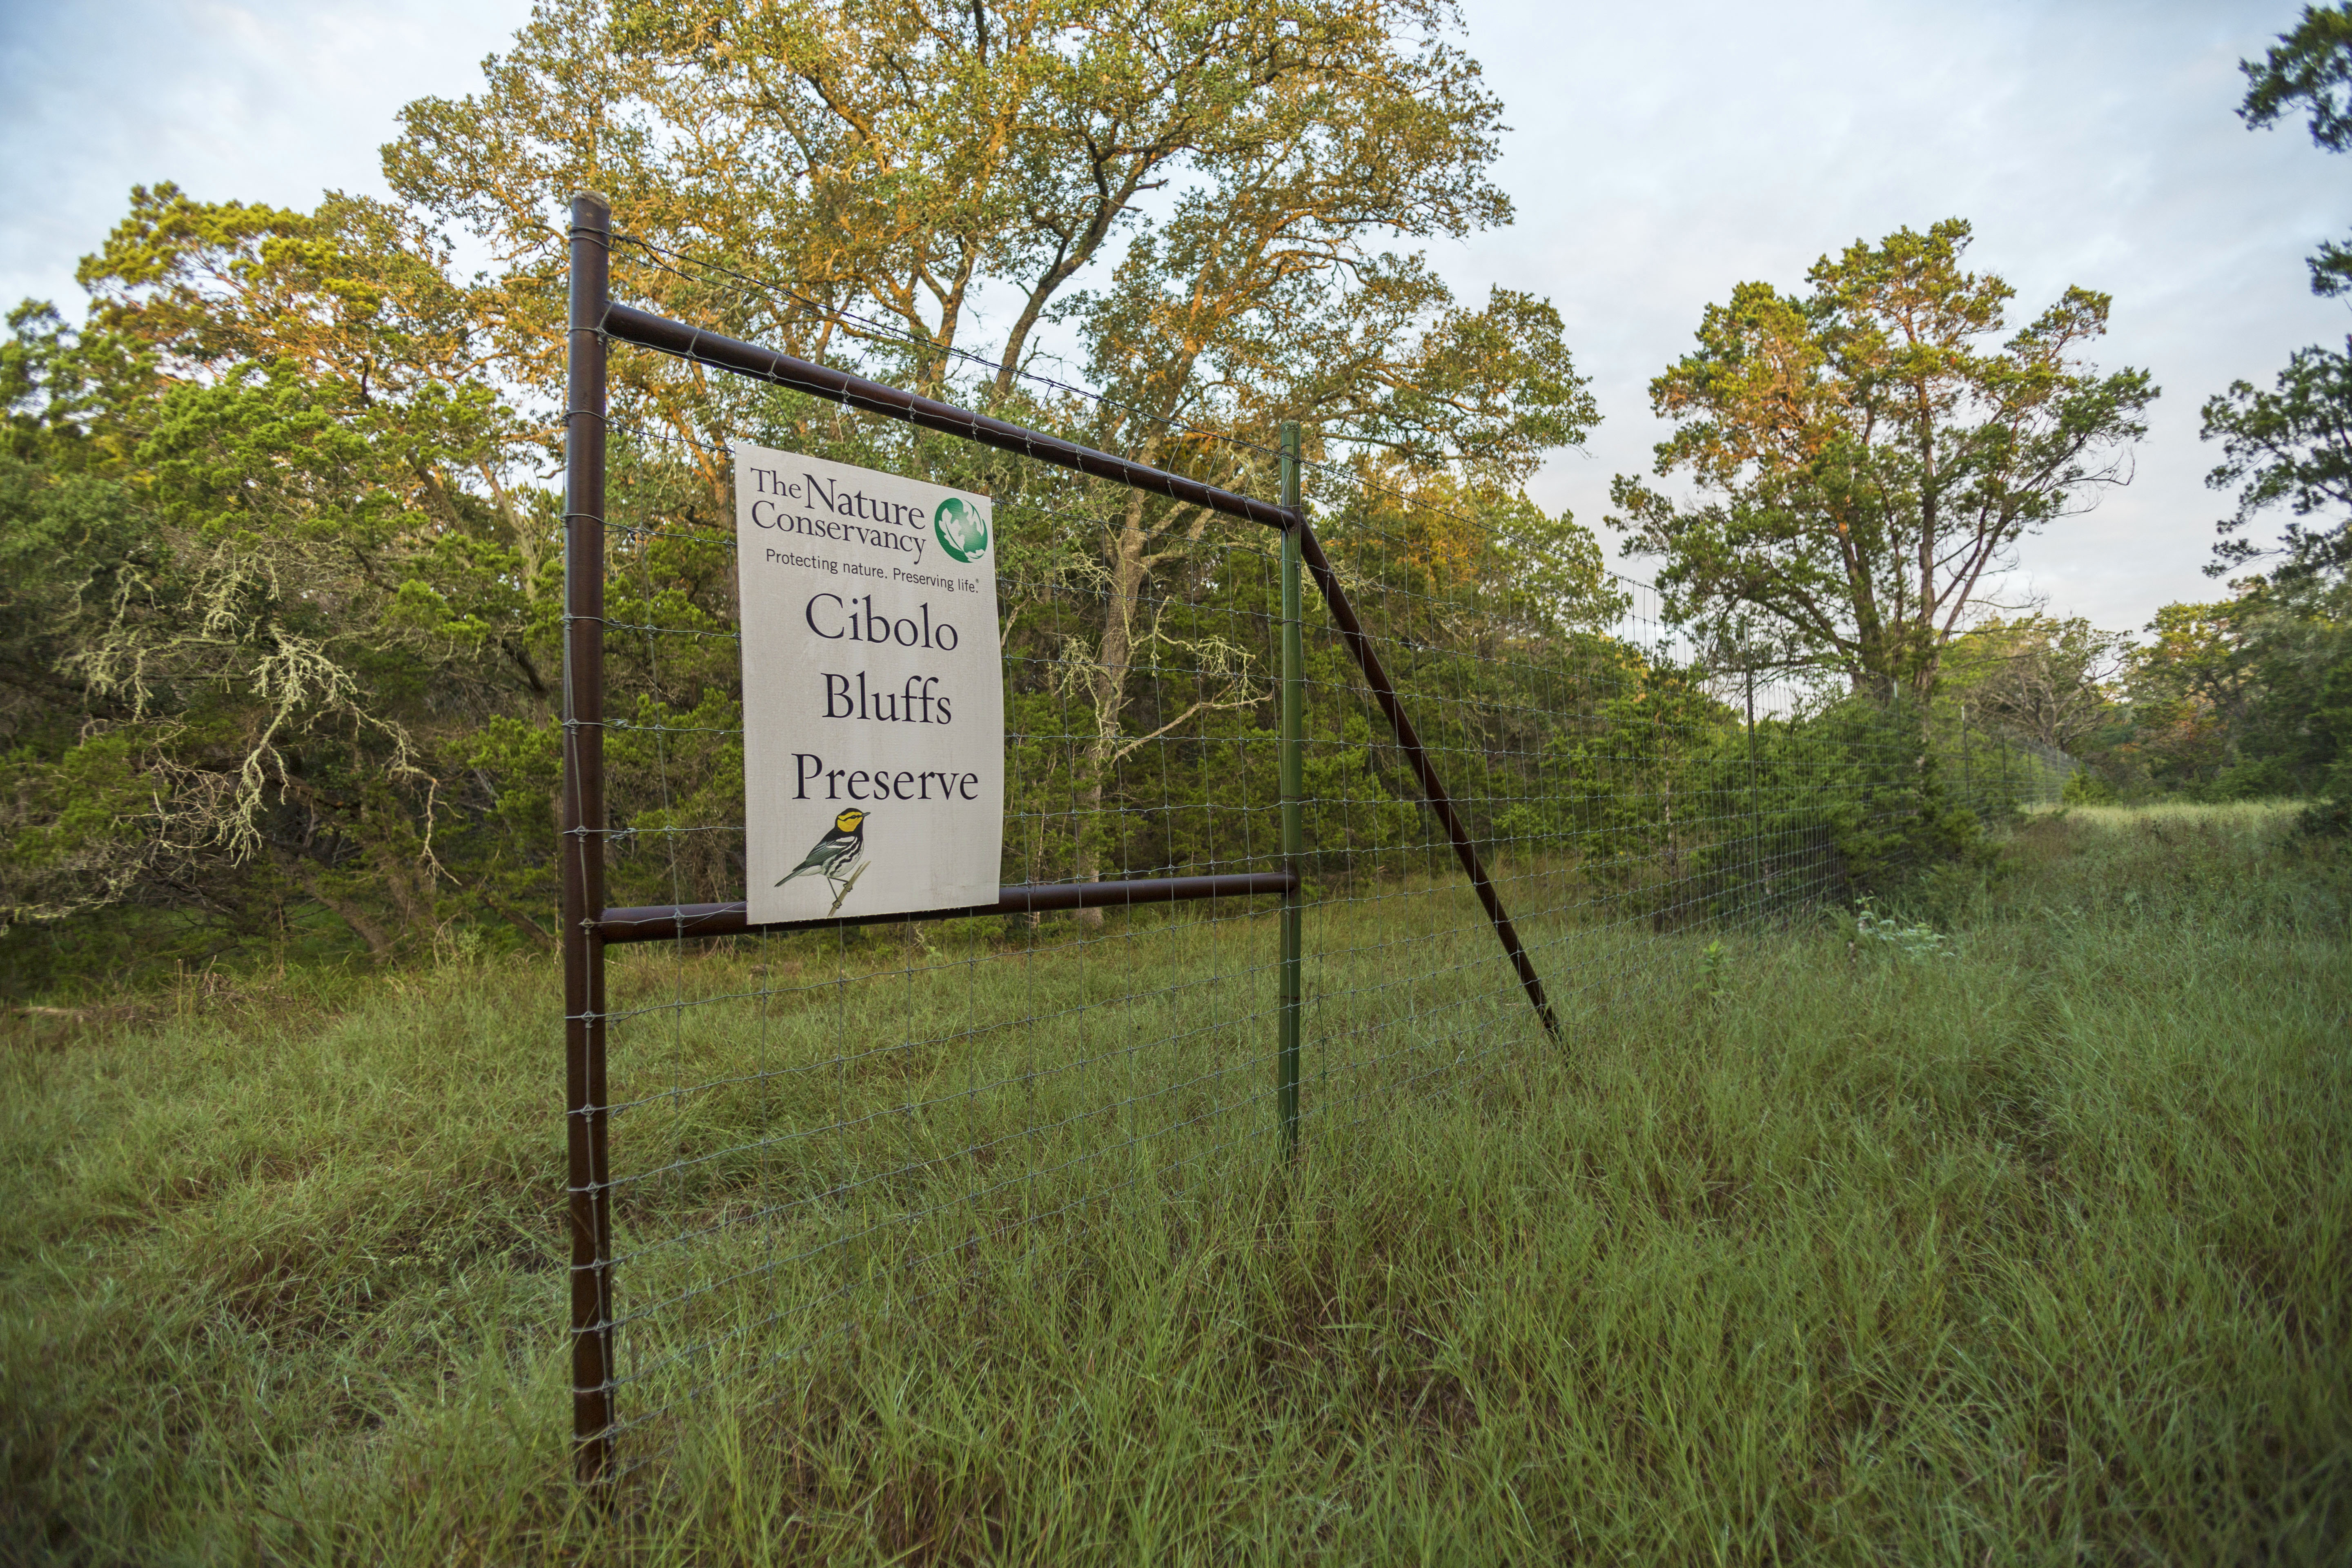 The Cibolo Bluffs Preserve sign sits on a wire fence.